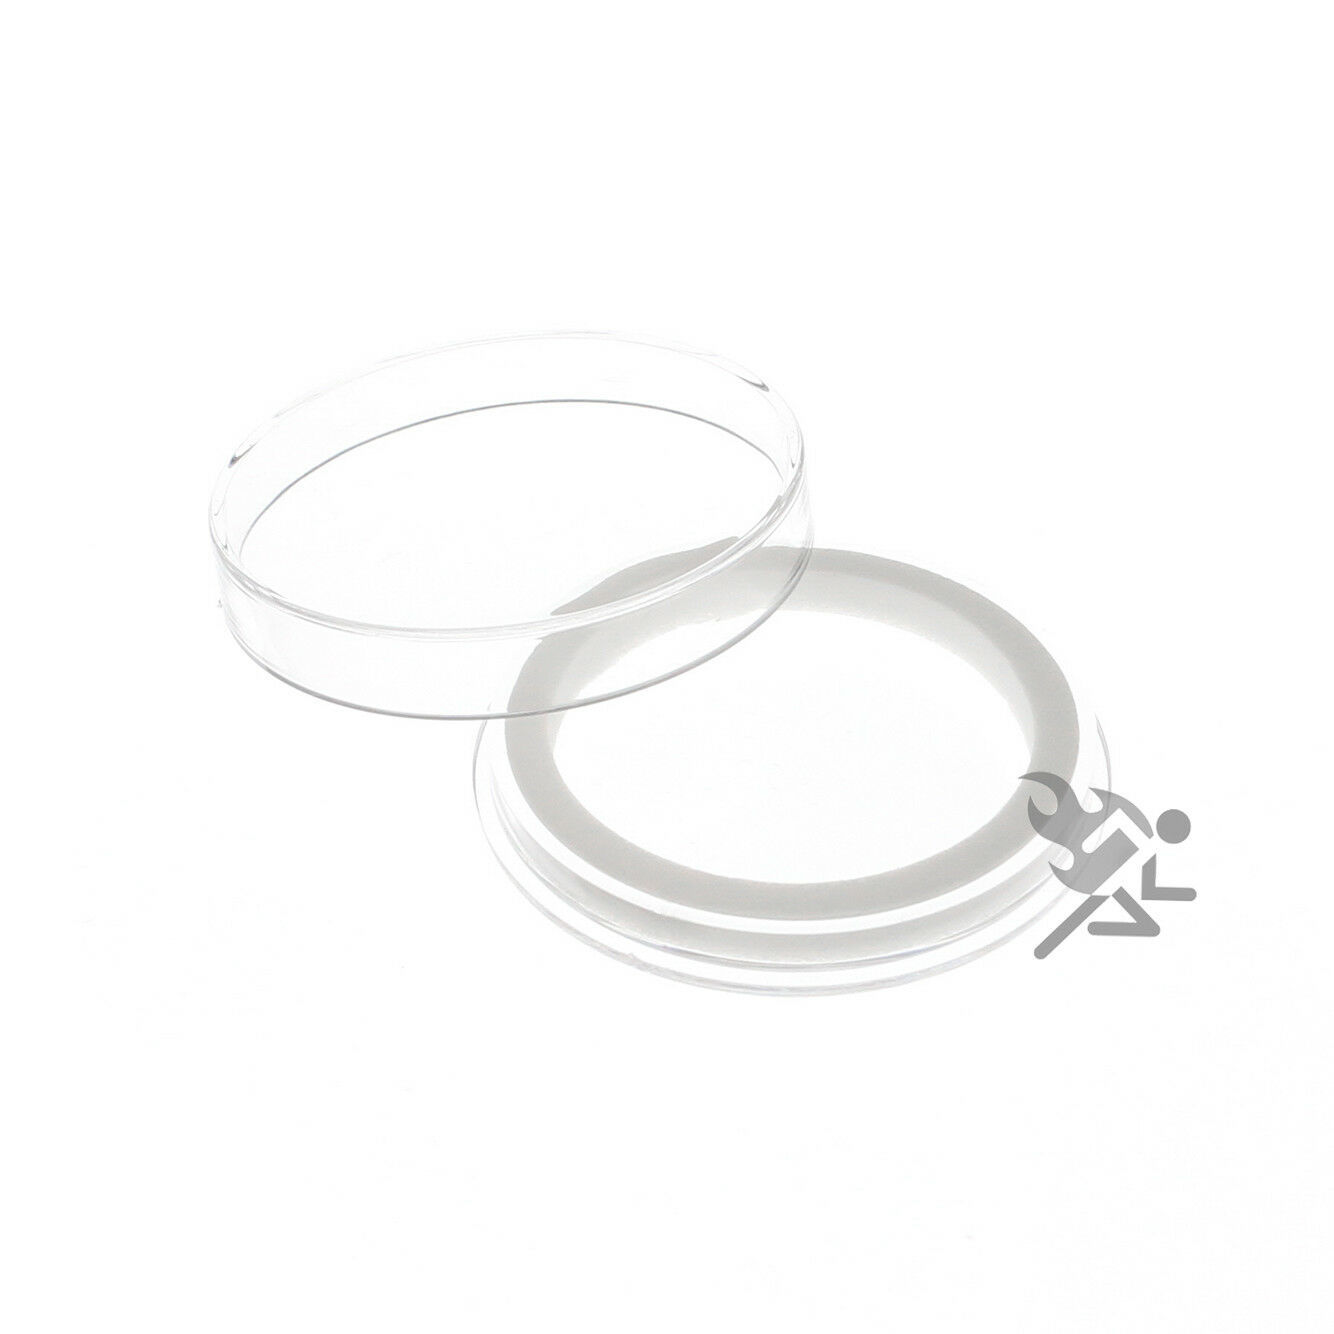 Elemetal Series Coin Capsules Air-Tite Holder High Relief 40mm White Ring 5 Pack - $10.95